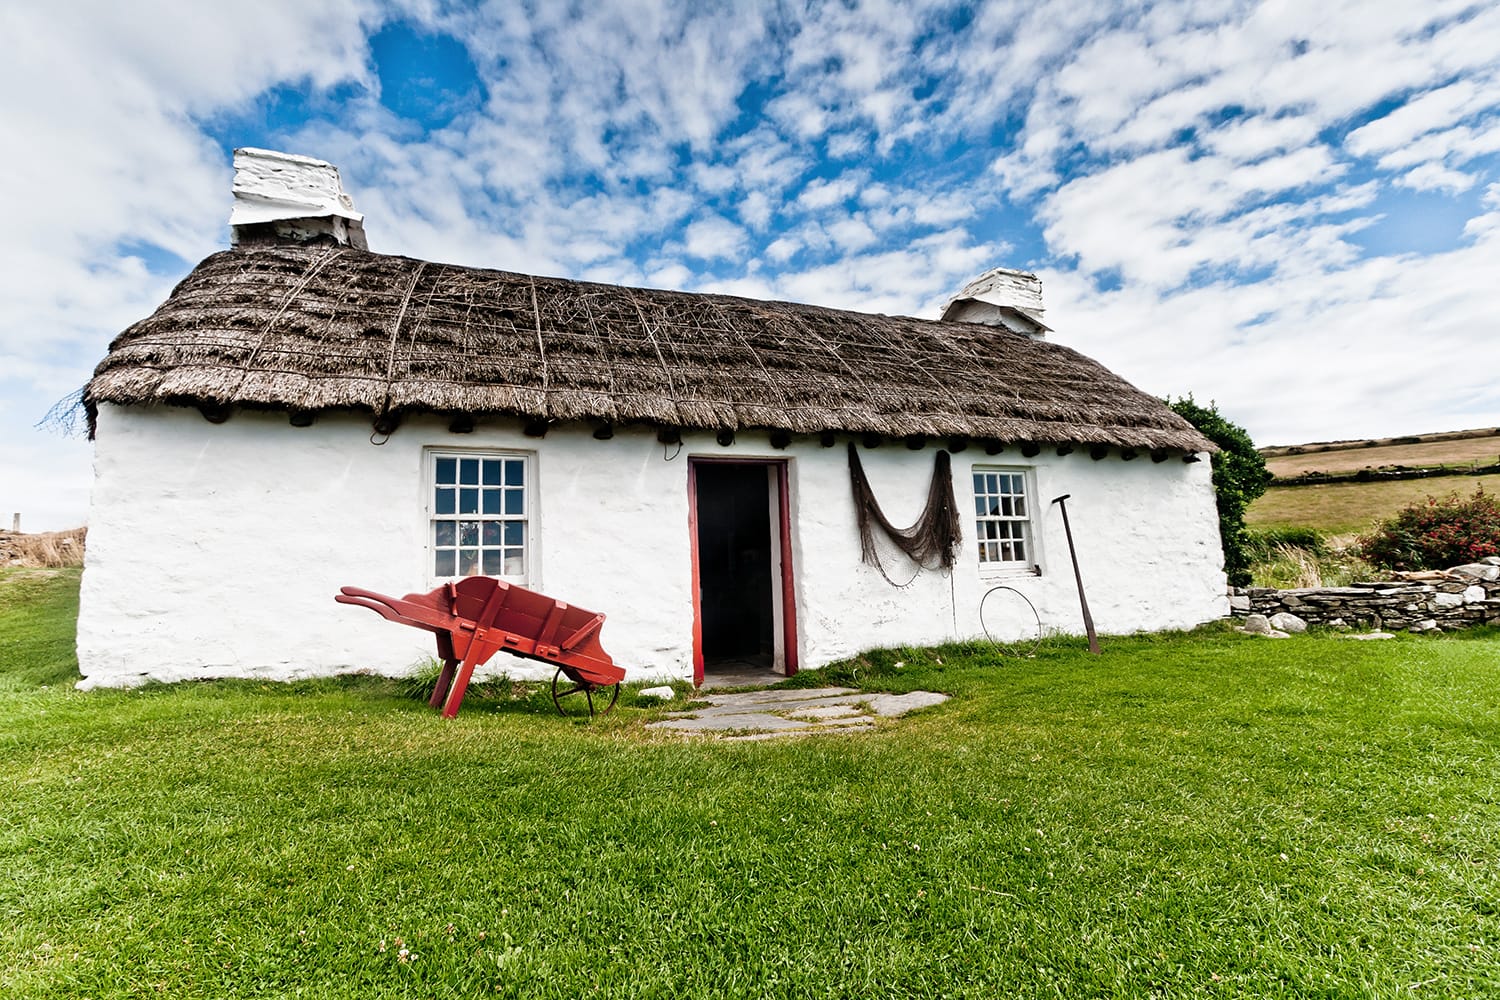 Old fashioned thatched crofter's cottage at Cregneash in the Isle of Man with red wooden wheelbarrow, fishing net and agricultural tool in the foreground with green grass and a blue sky.